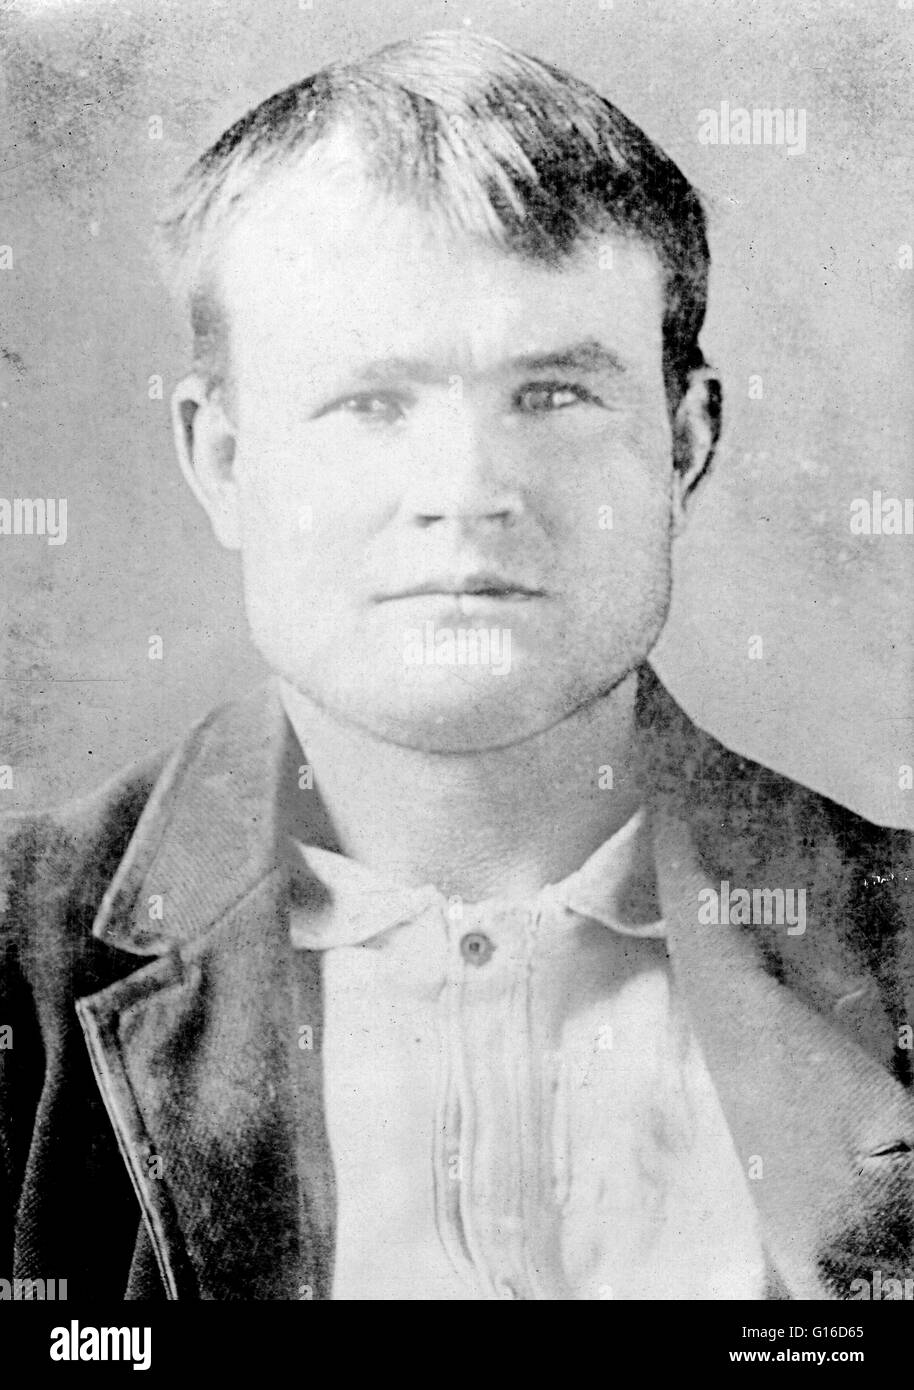 Photograph taken at the Wyoming State Penitentiary, Laramie, Wyoming, and mounted on a card from Pinkerton's National Detective Agency with information about Parker, giving his aliases as George Cassady and 'Butch' Cassady, 1893. Robert Leroy Parker (Apri Stock Photo